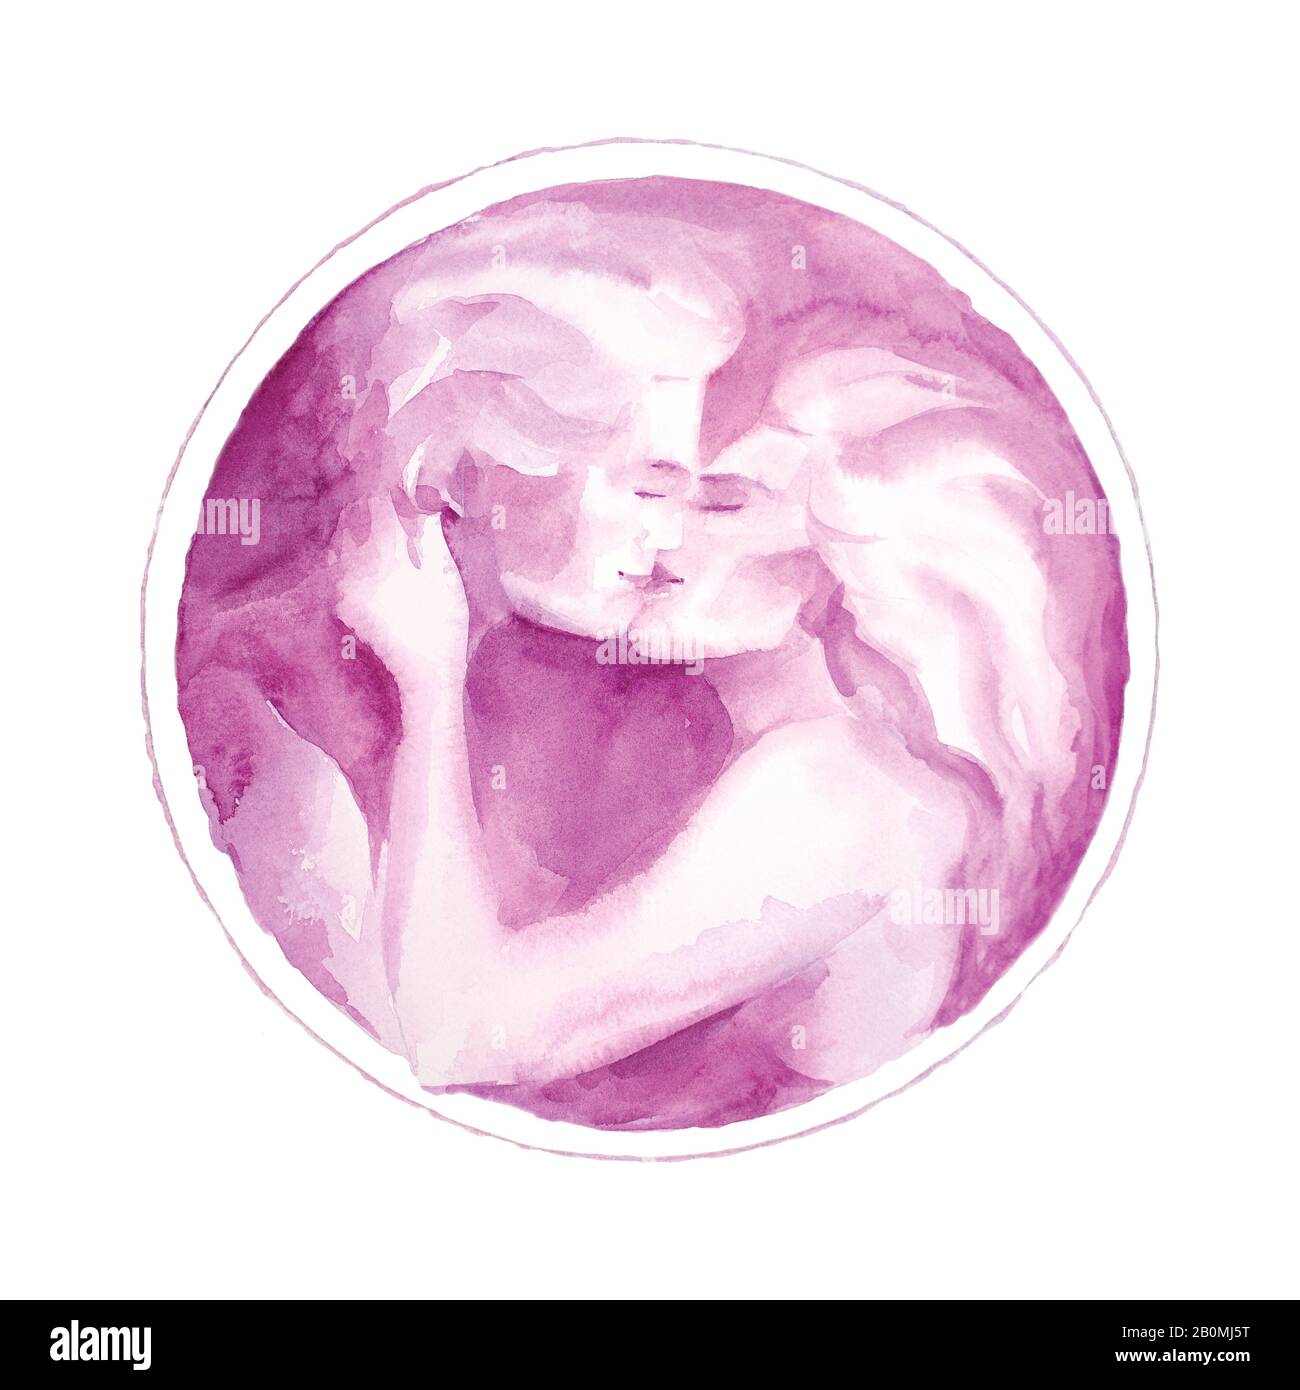 Couple in Love Kiss. Romantic. Secret Life. Big Love. Watercolor. Pink color. Print quality. White background. Stock Photo